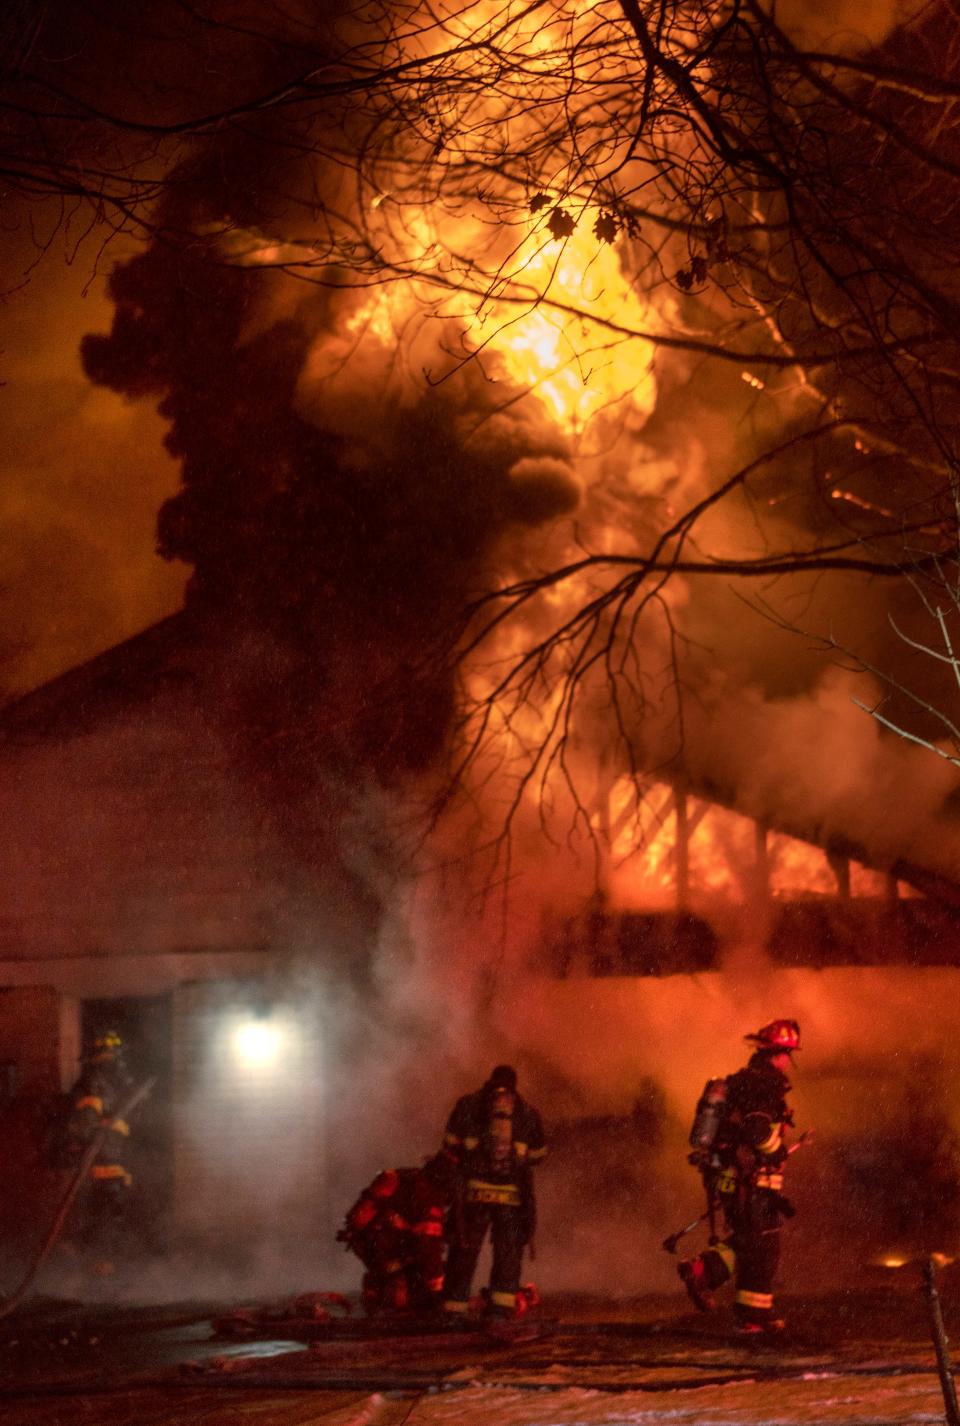 Firefighters put out a fire at a house Thursday, Dec. 22, 2022 on the corner of Clemson Street and Albright Court.